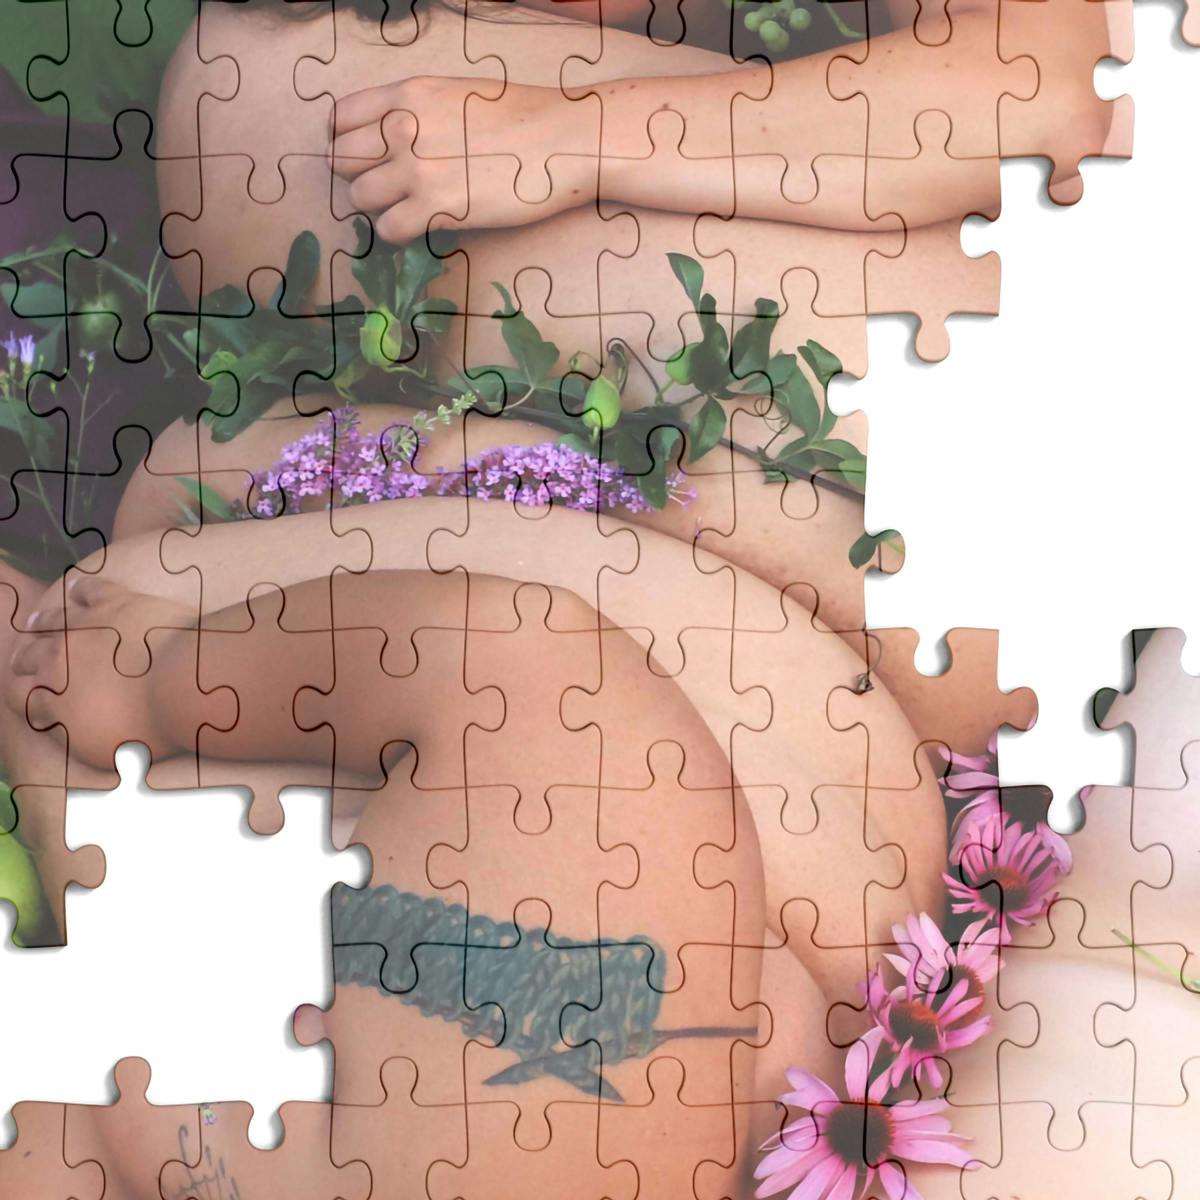 Introducing Naked Bits' curated line of naughty jigsaw puzzles.